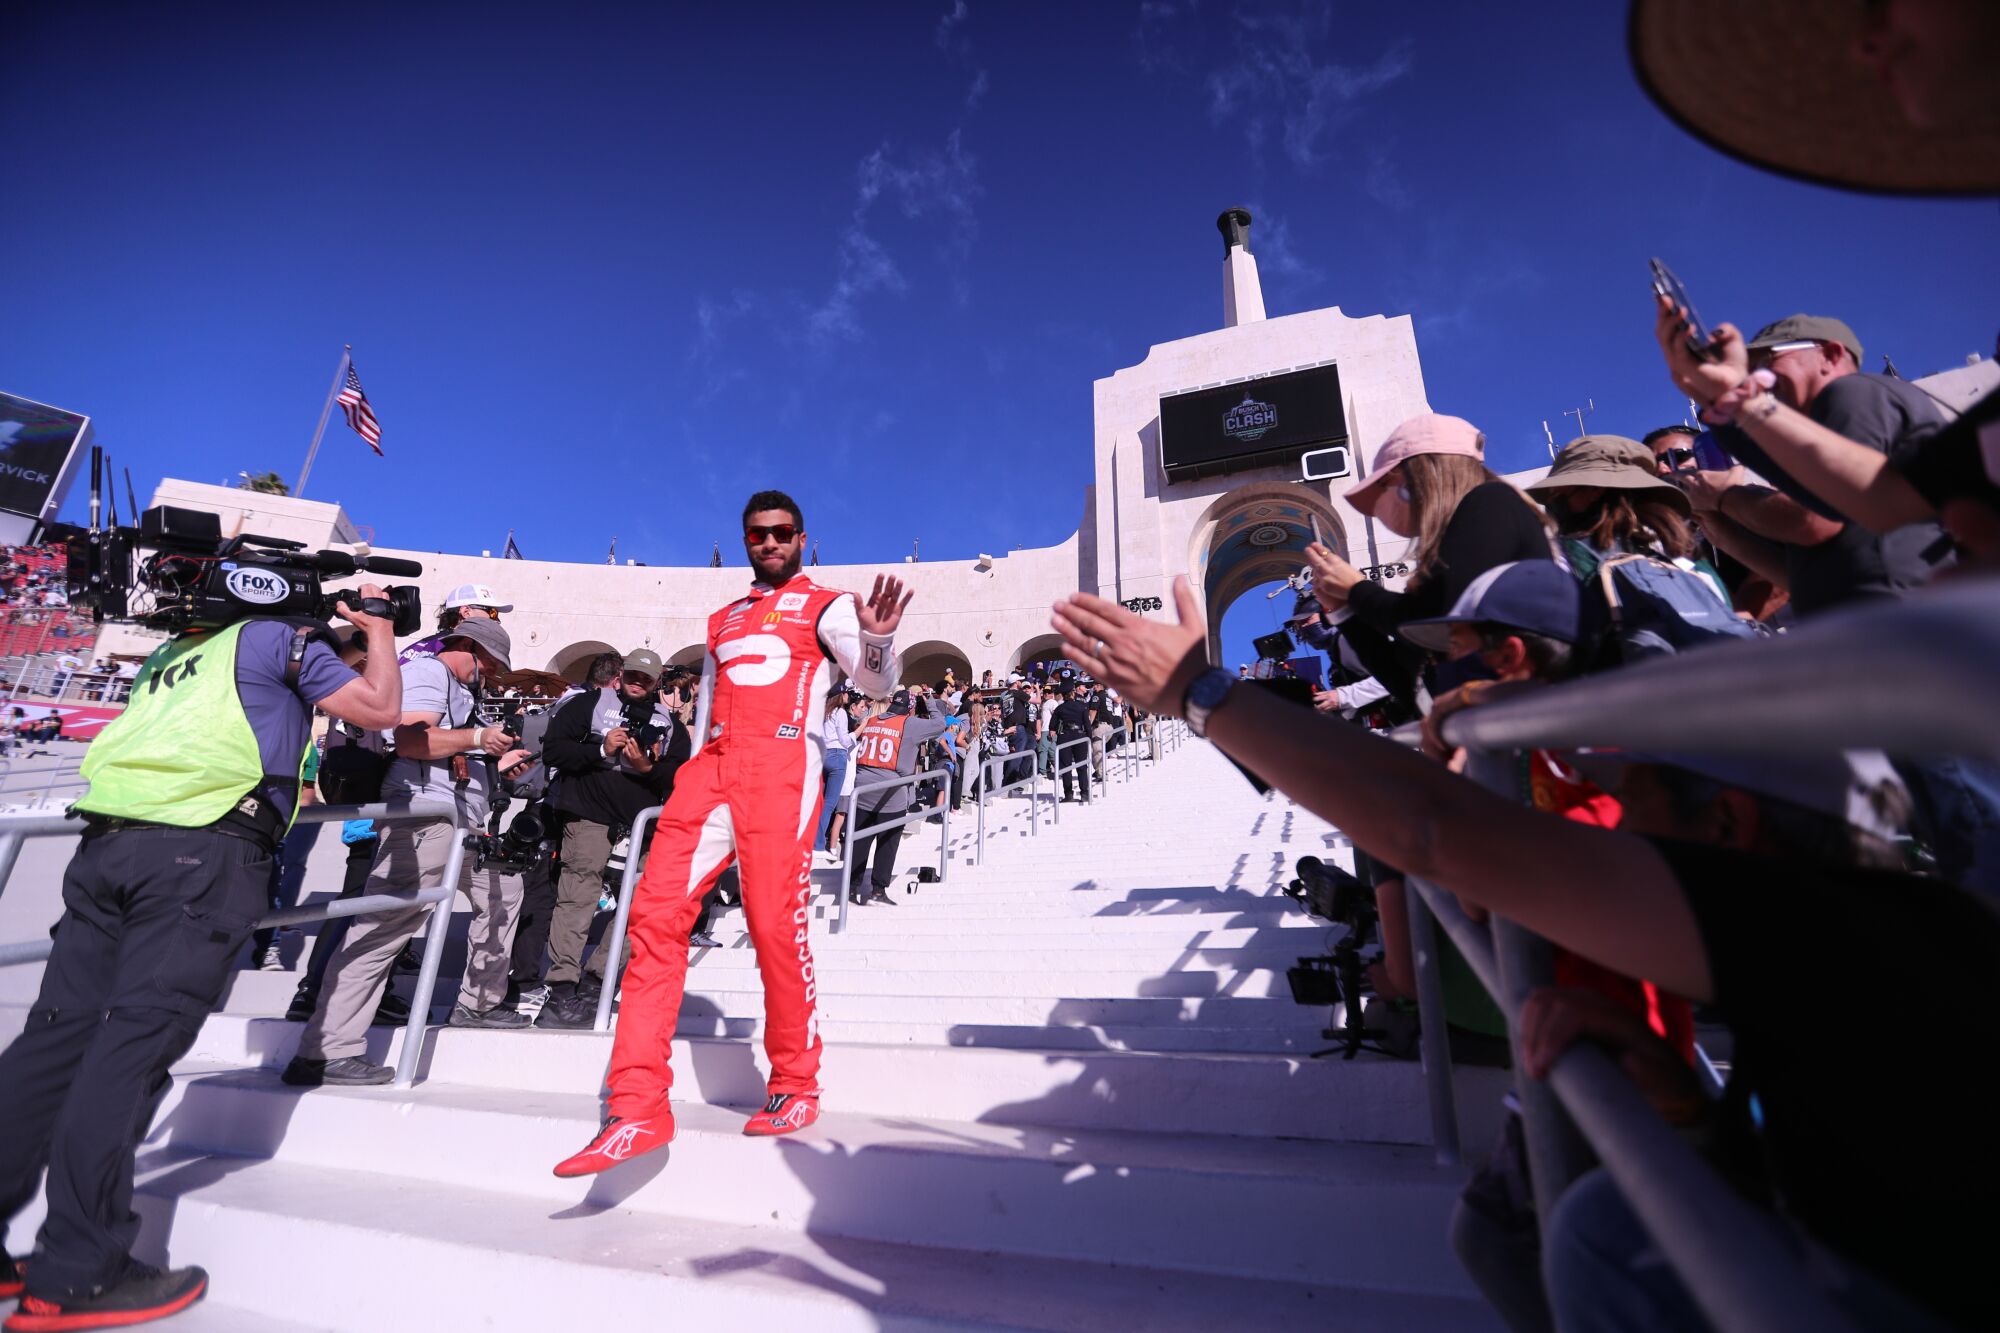 NASCAR racer Bubba Wallace walks down the staircase to the track as he is introduced